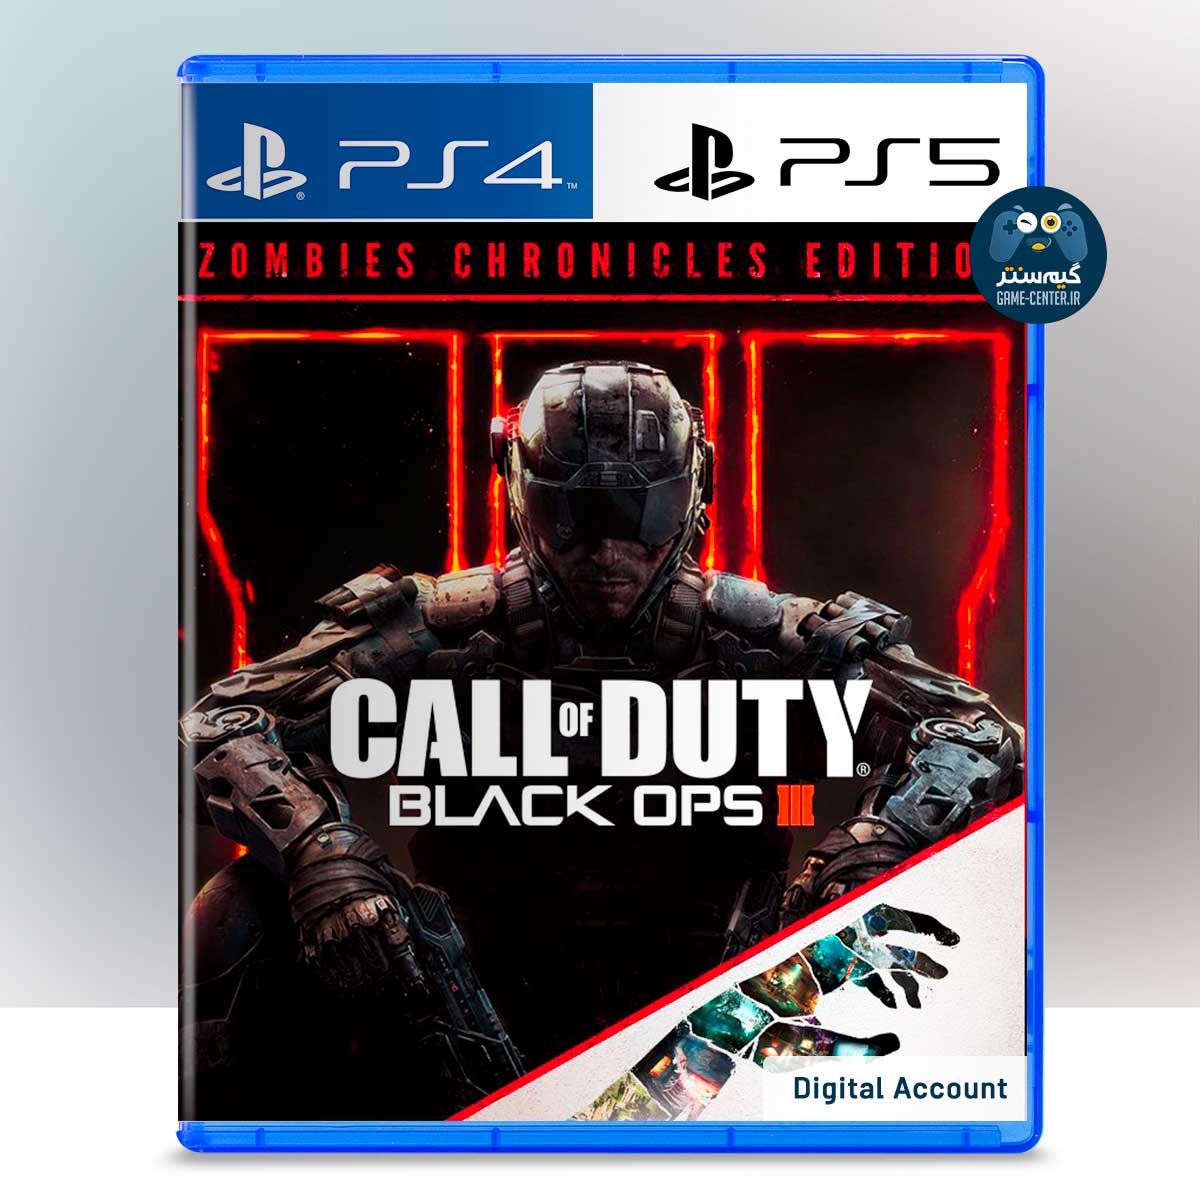 call of duty black ops 3 zombies chronicles edition